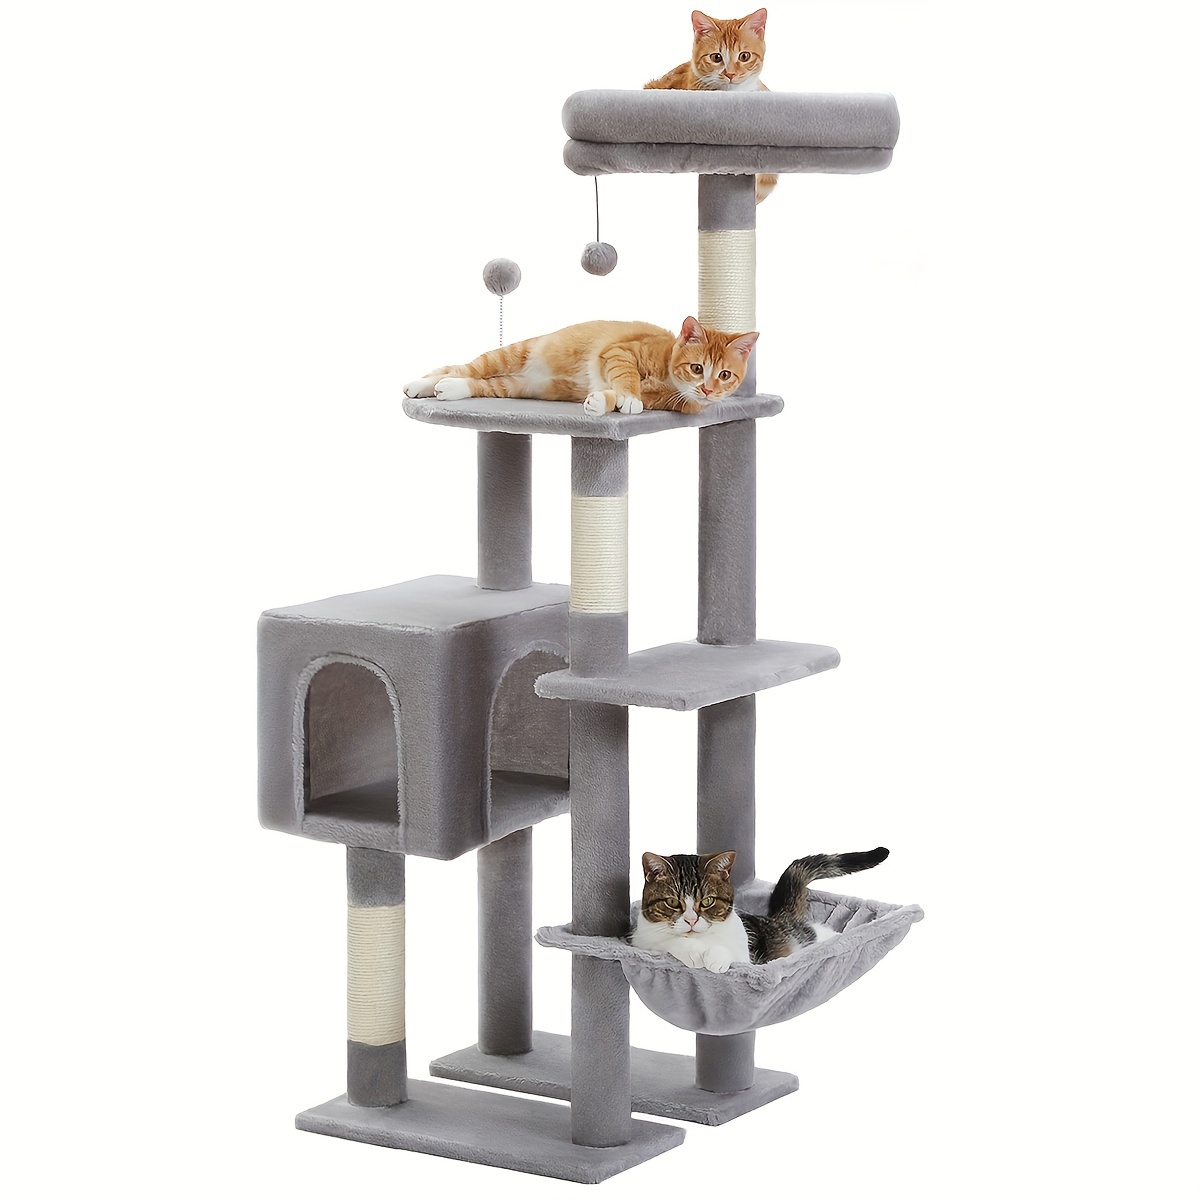 

Anppex Cat Tree Tower With Big Hammock, Cat Tower With Scratching Post And Large Cat Condo For Indoor Cats, Multi-level Cat Tree With 2 Perches, Cat Cave, Gray